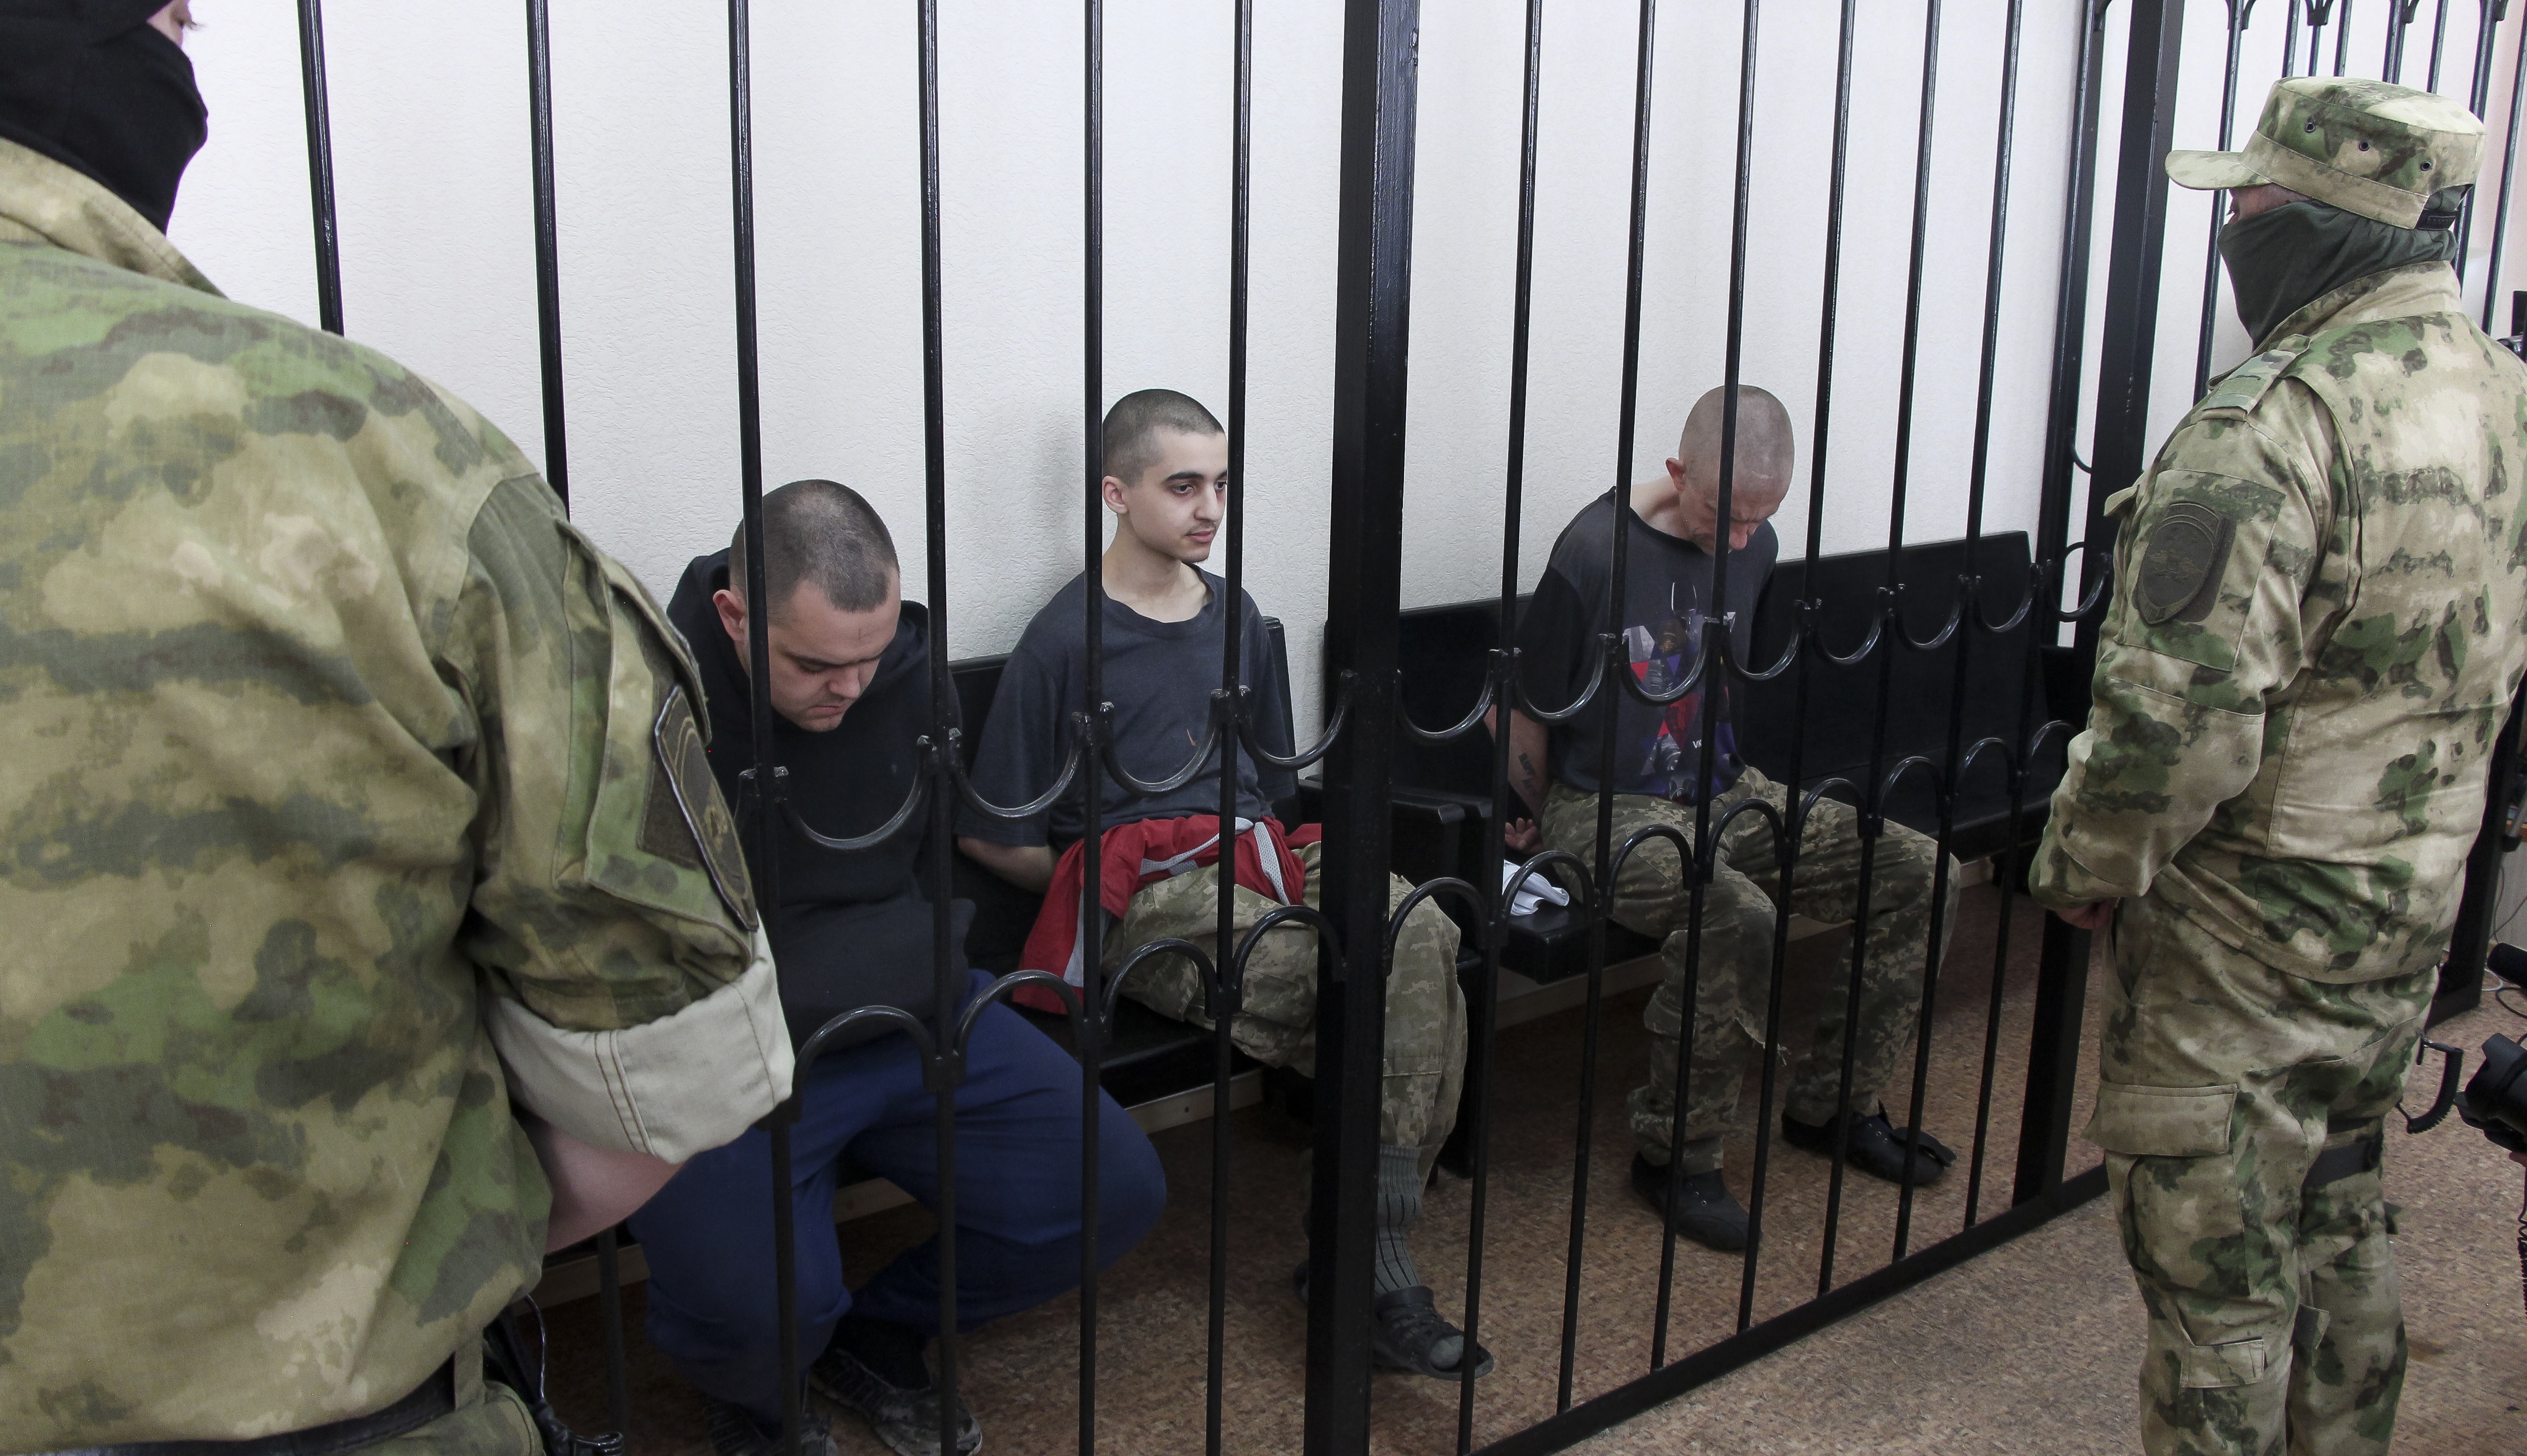 Two British citizens Aiden Aslin, left, and Shaun Pinner, right, and Moroccan Saaudun Brahim, center, have been sentenced to death by pro-Moscow rebels in eastern Ukraine for fighting on Ukraine's side. 